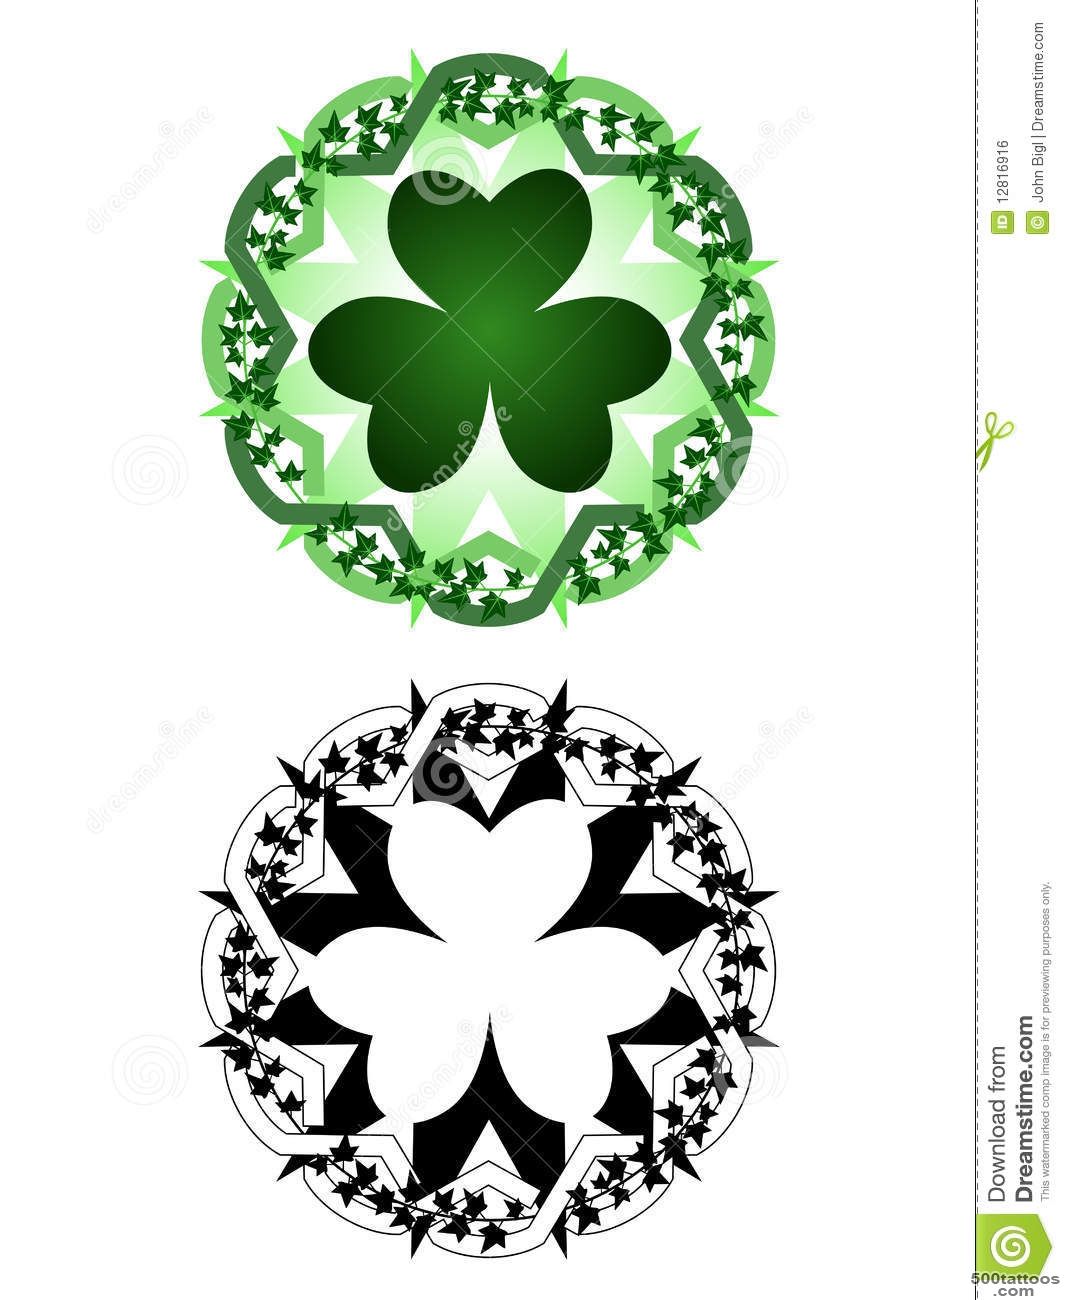 Luck Tattoo Royalty Free Stock Image   Image 12816916_34